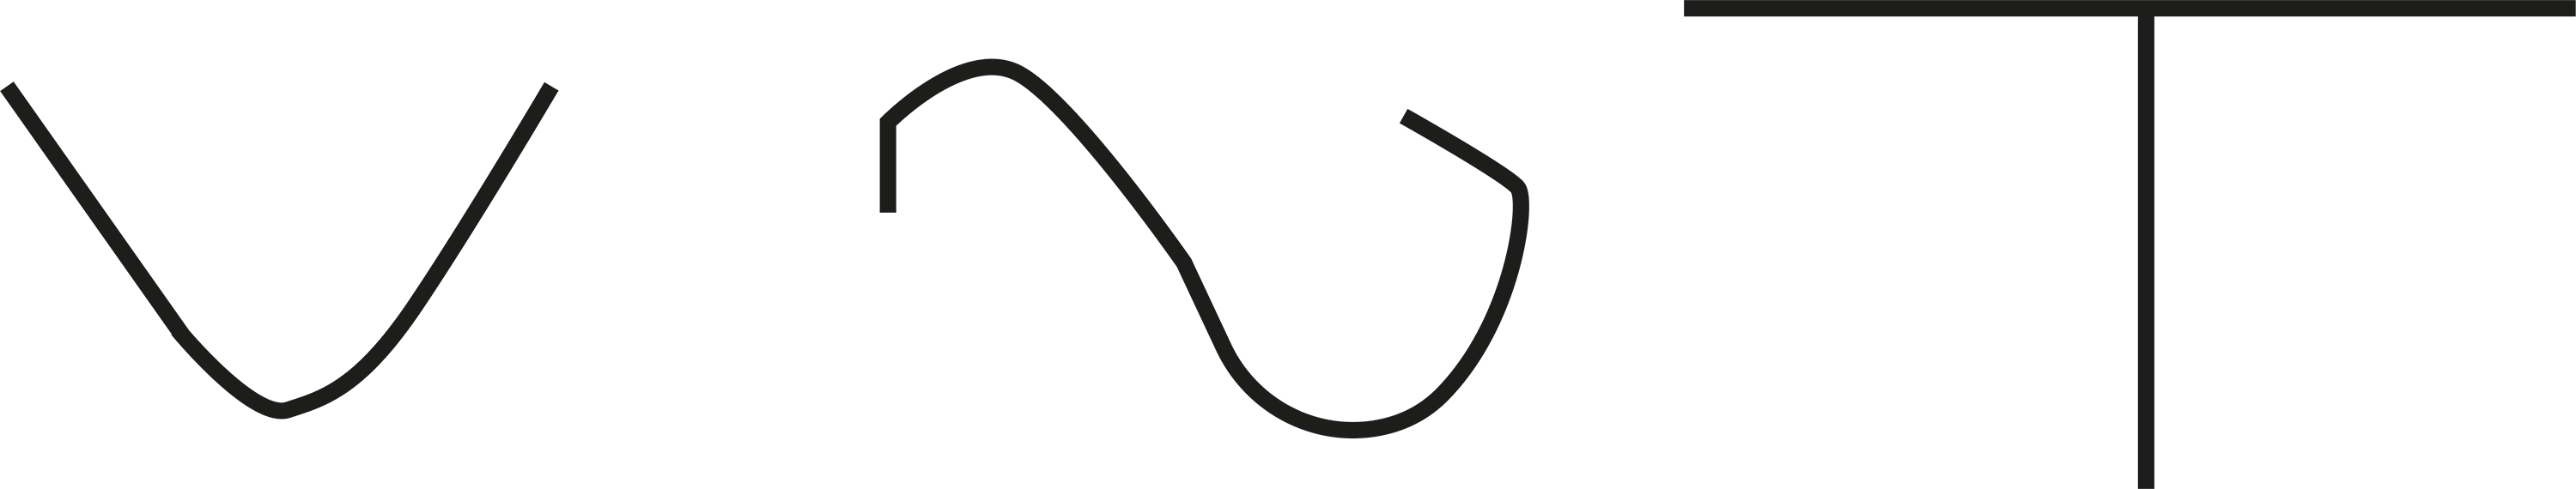 Diagrams to illustrate open curves